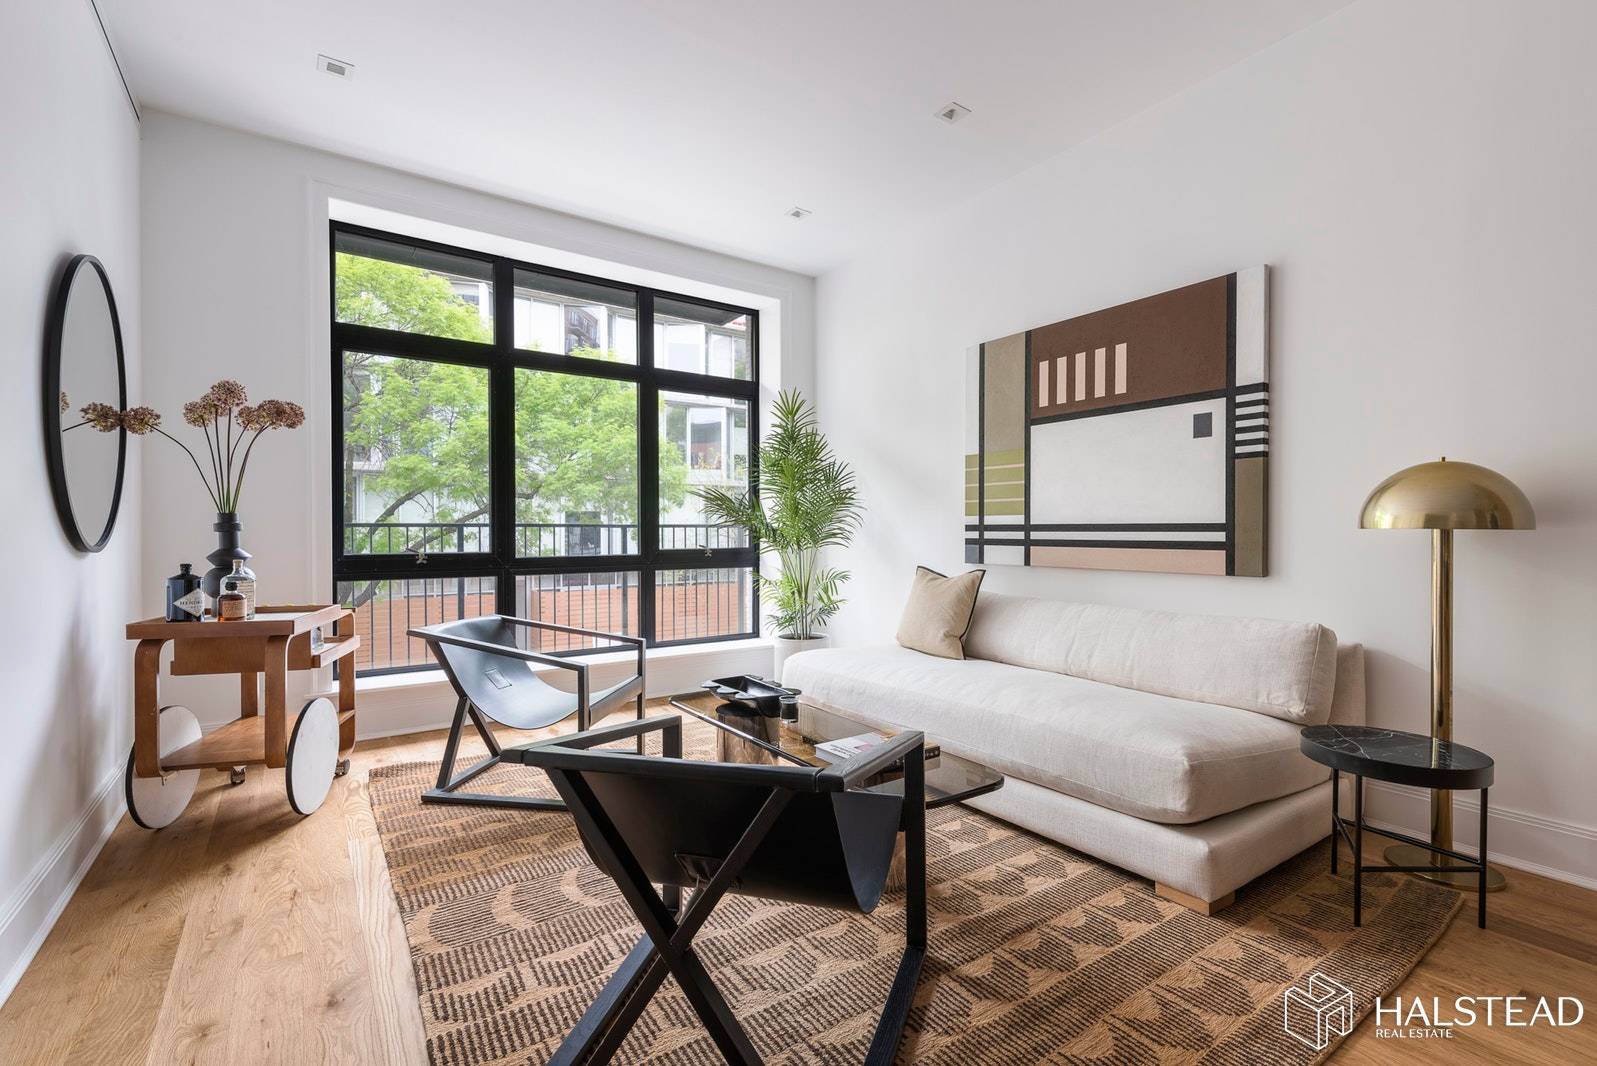 IMMEDIATE OCCUPANCY This newly constructed boutique condominium consisting of eight full floor homes brings a timeless yet modern beauty to a picturesque tree lined street in the heart of Park ...